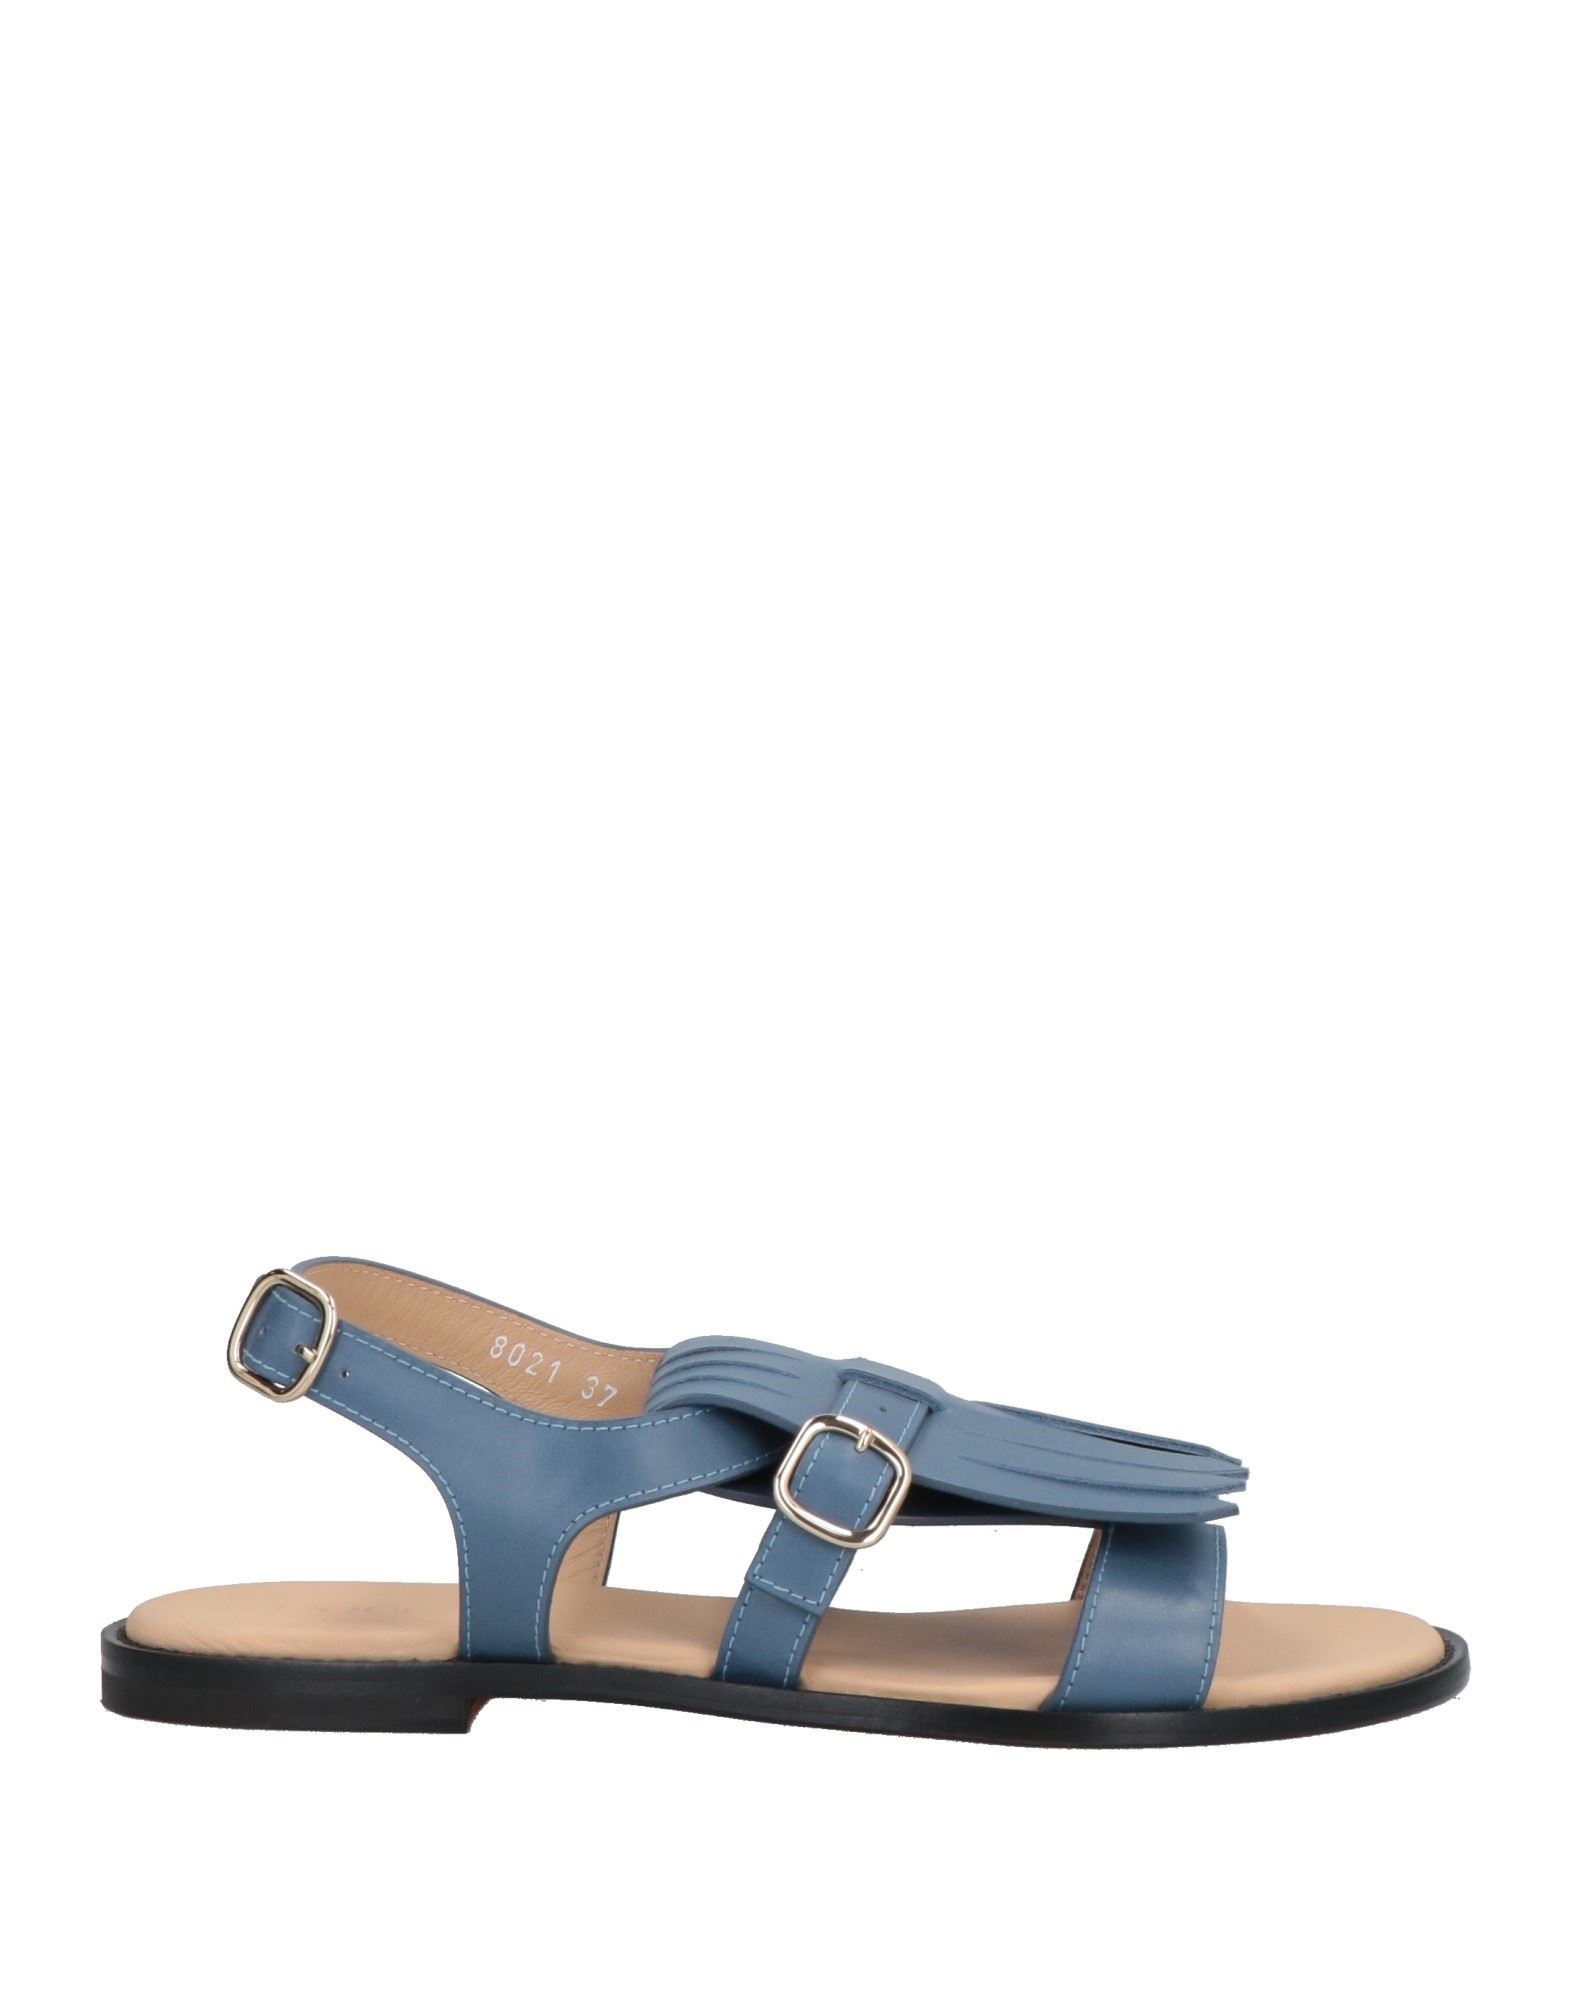 Doucal's Woman Sandals Slate Blue Size 7 Soft Leather